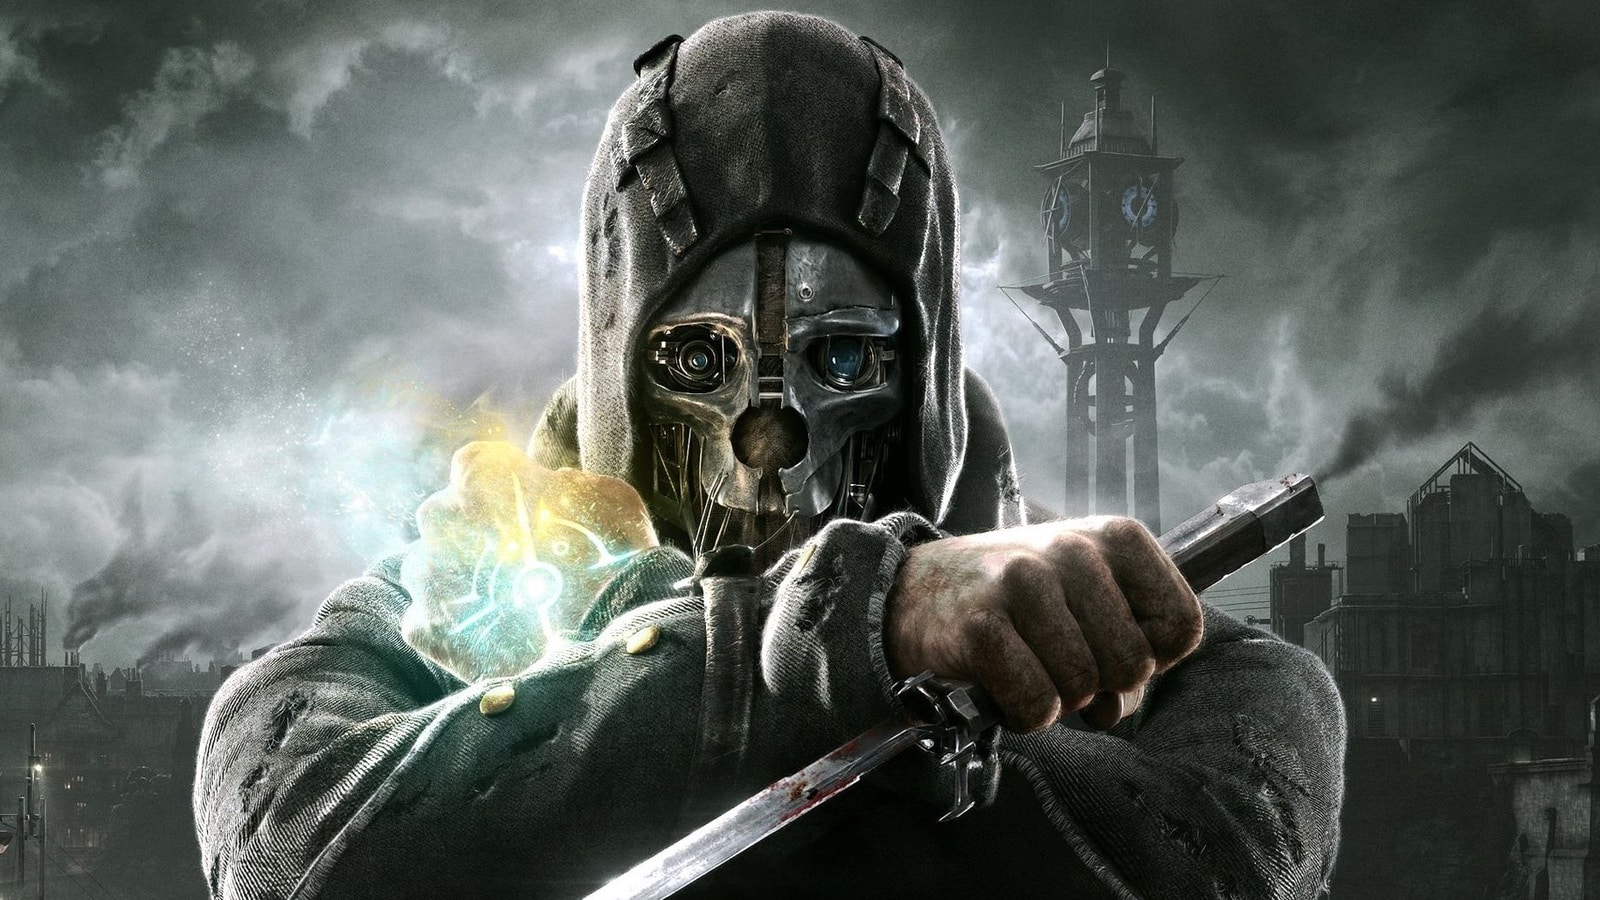 The Oblivion And Fallout 3 Remasters Sound Like Shameless Money-Grabs